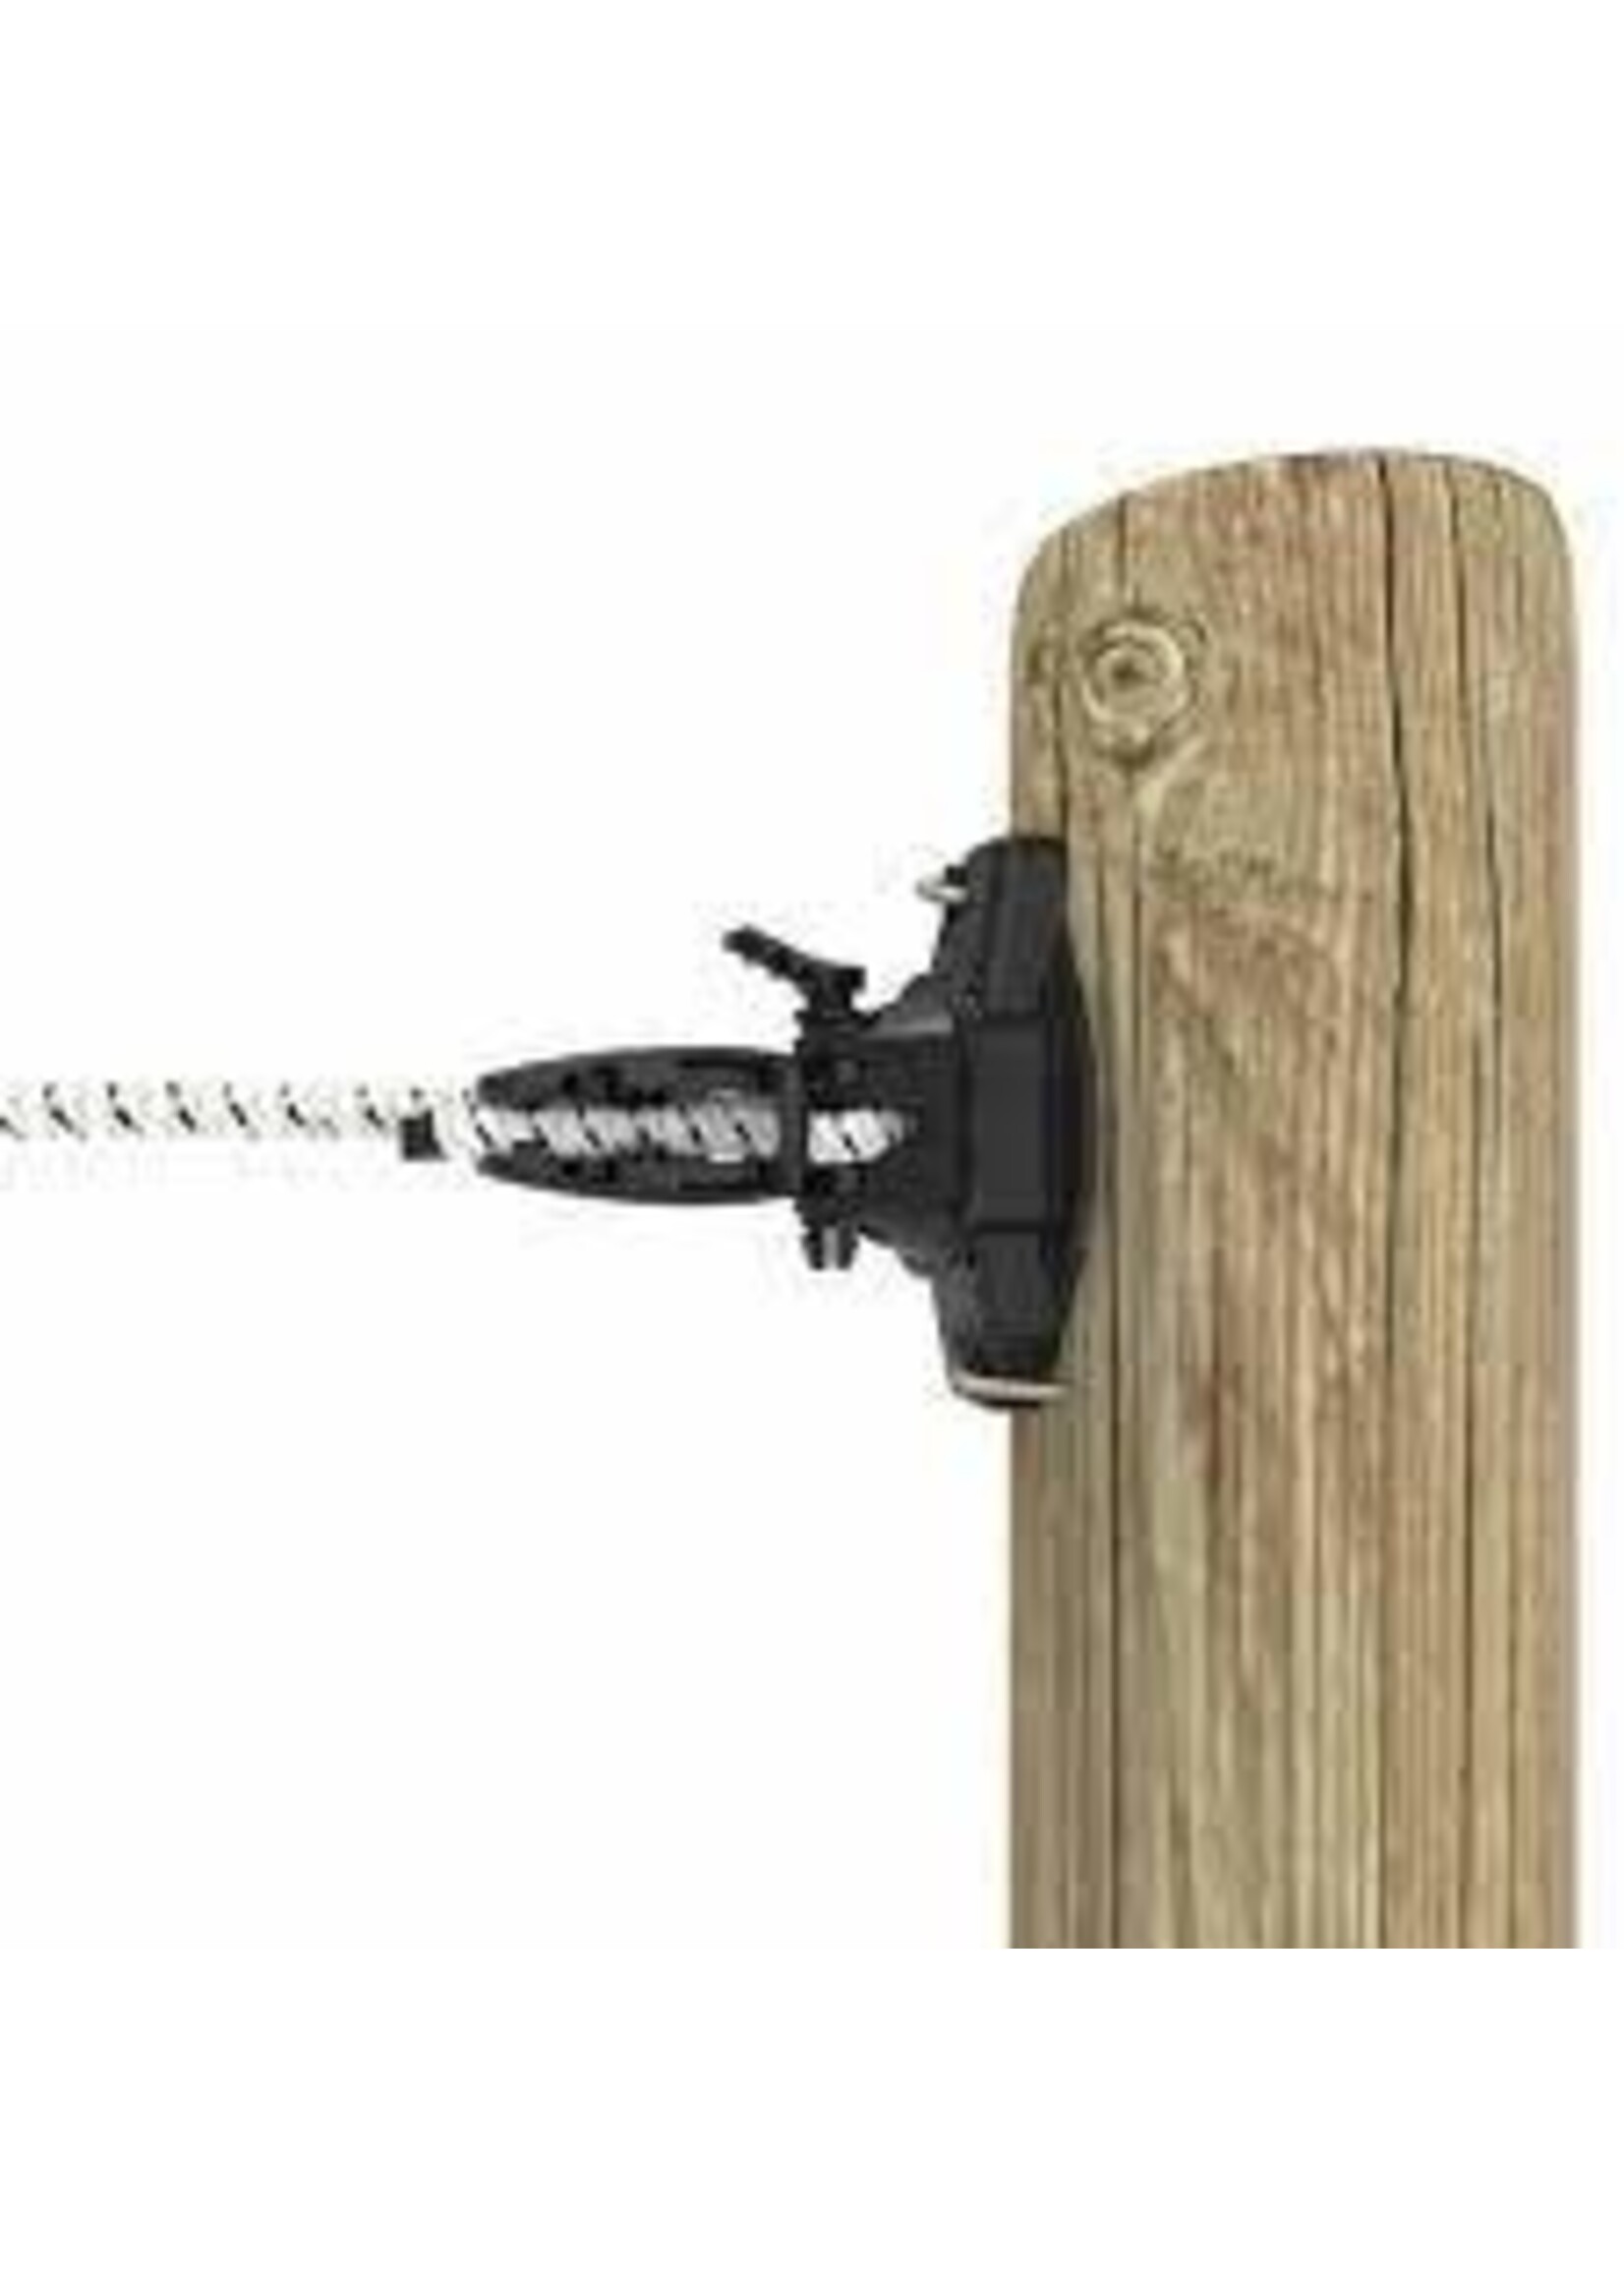 Gallagher Gate Kits - Bungy Cord Gripper